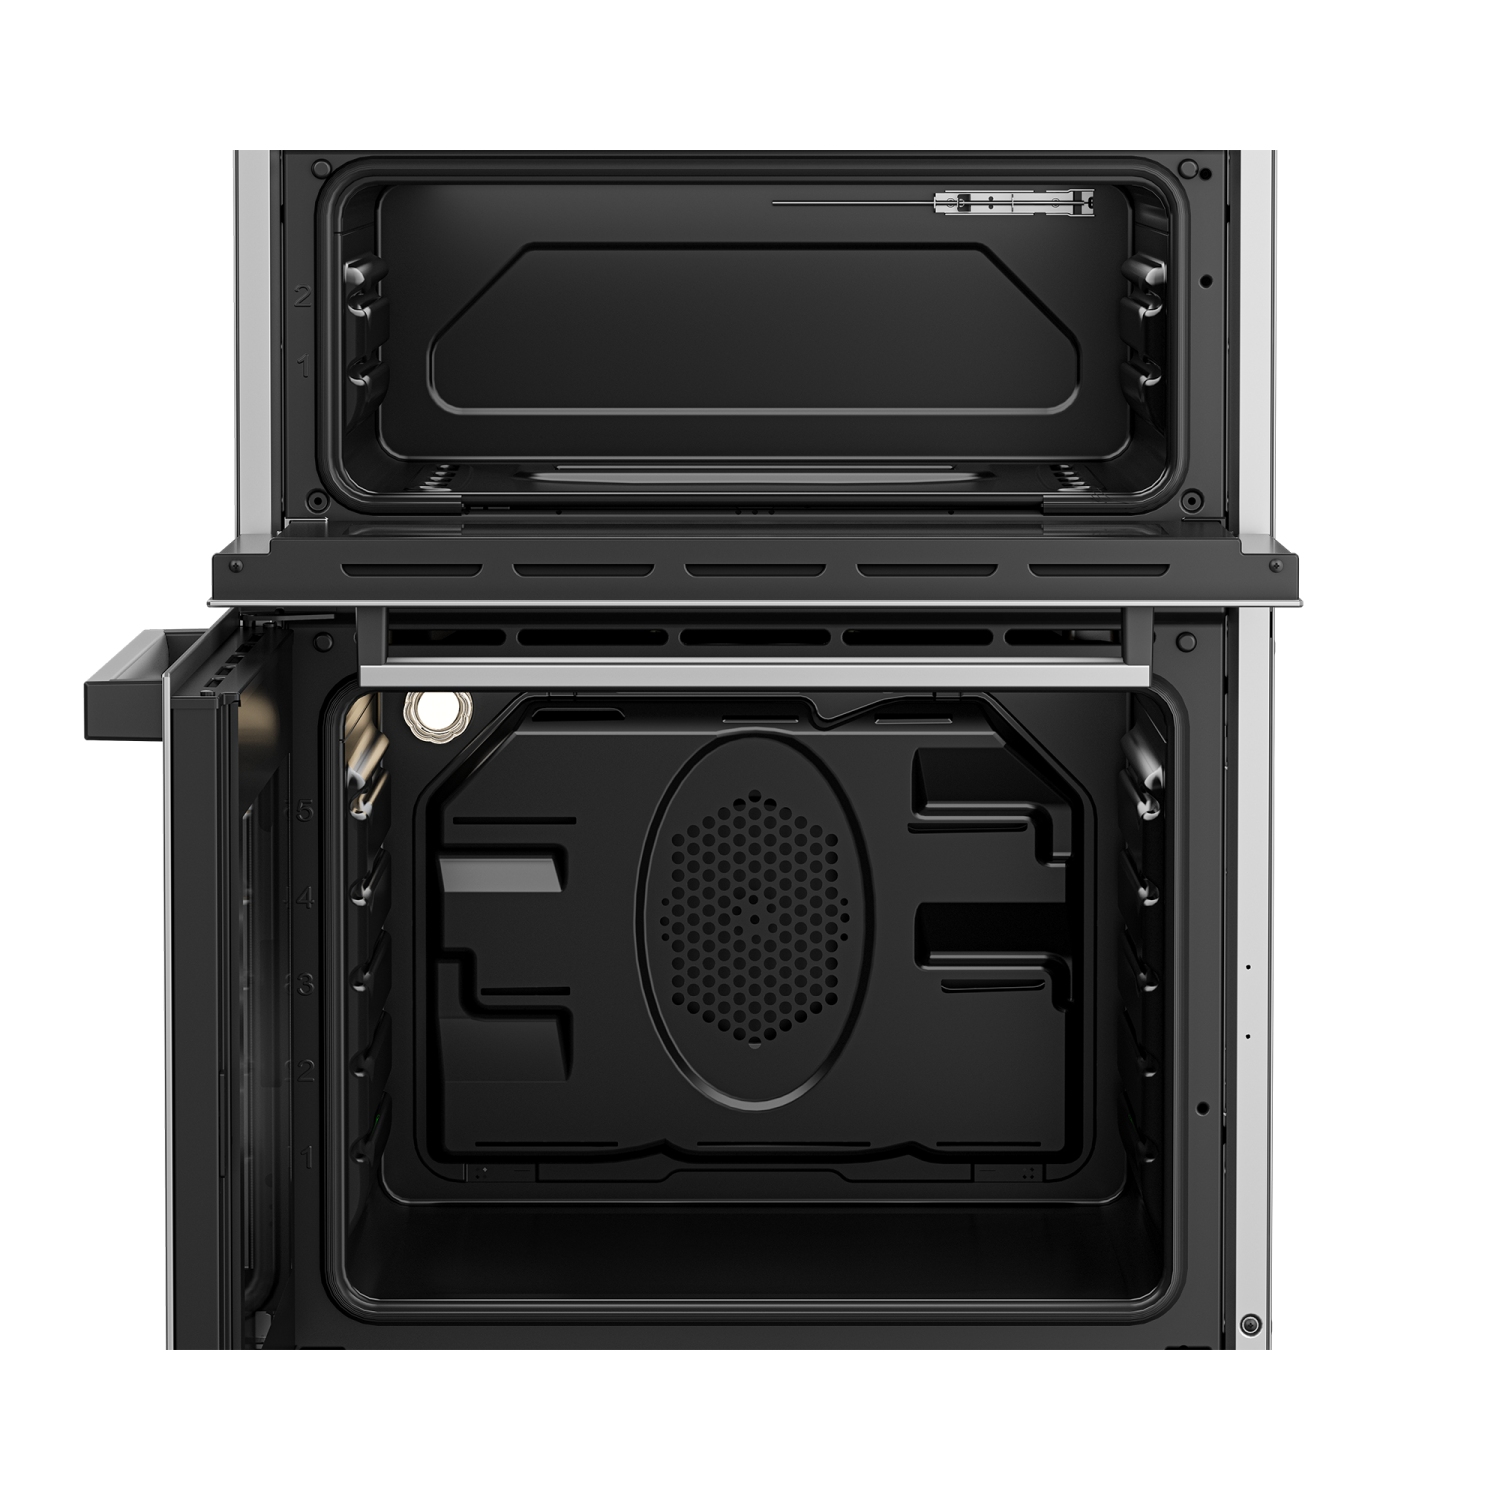 Beko EDC634S 60cm Double Oven Electric Cooker with Ceramic Hob - Silver - 3